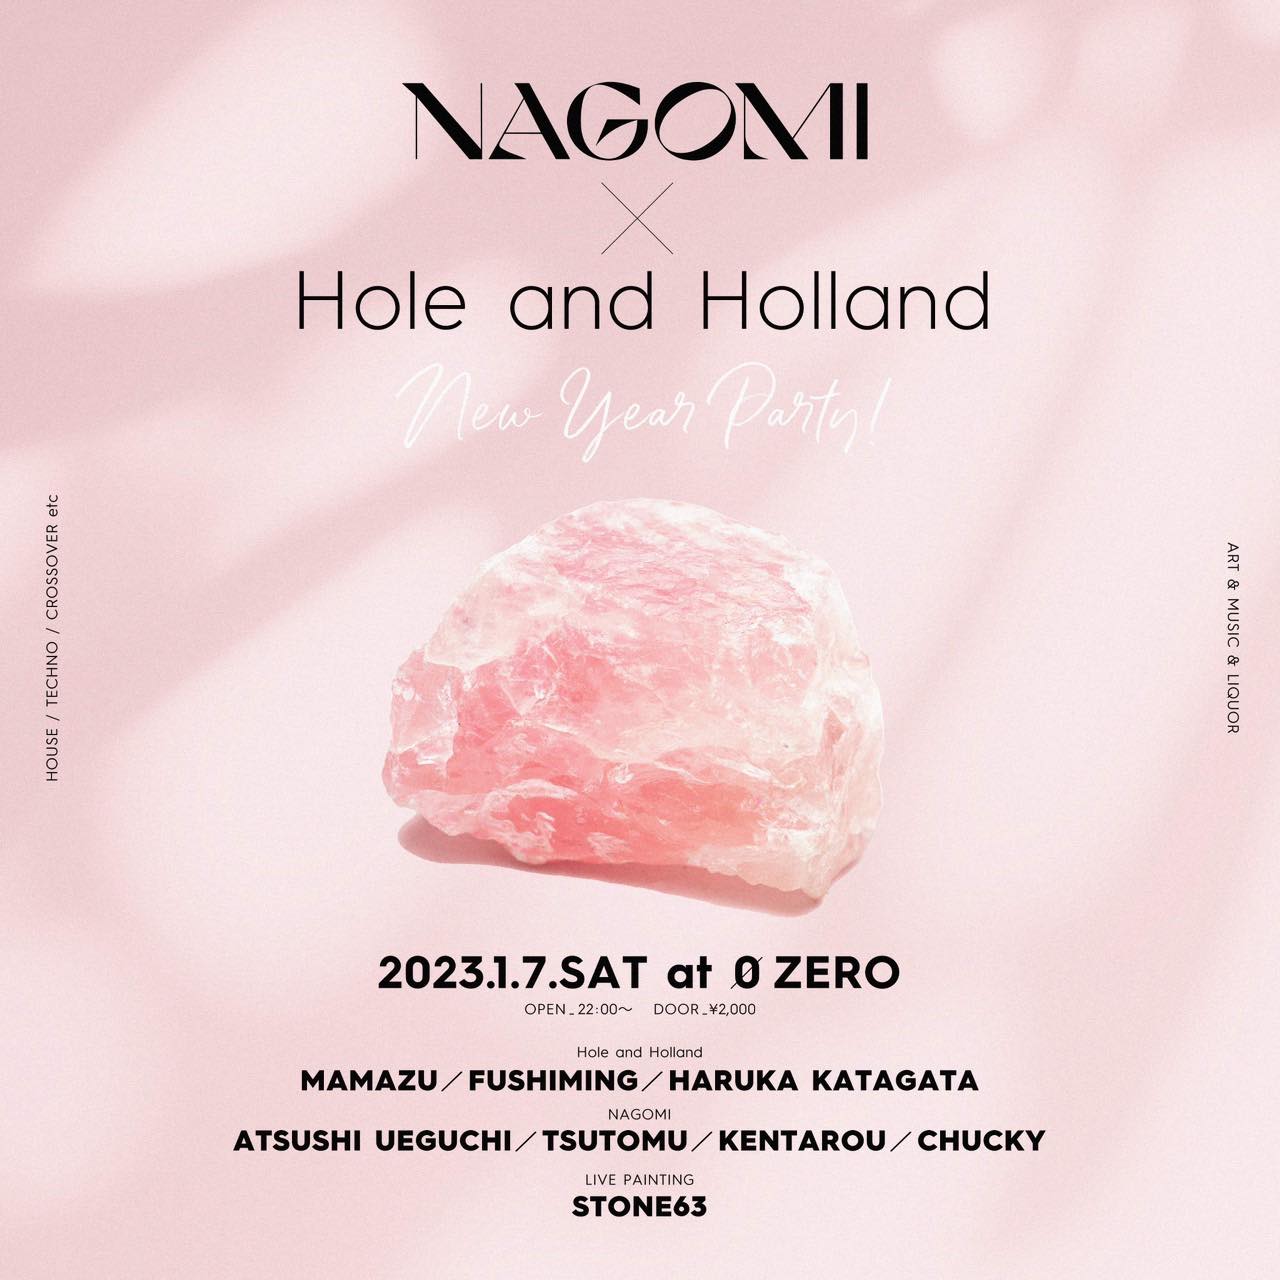 nagomi x Hole and Holland New Year Party